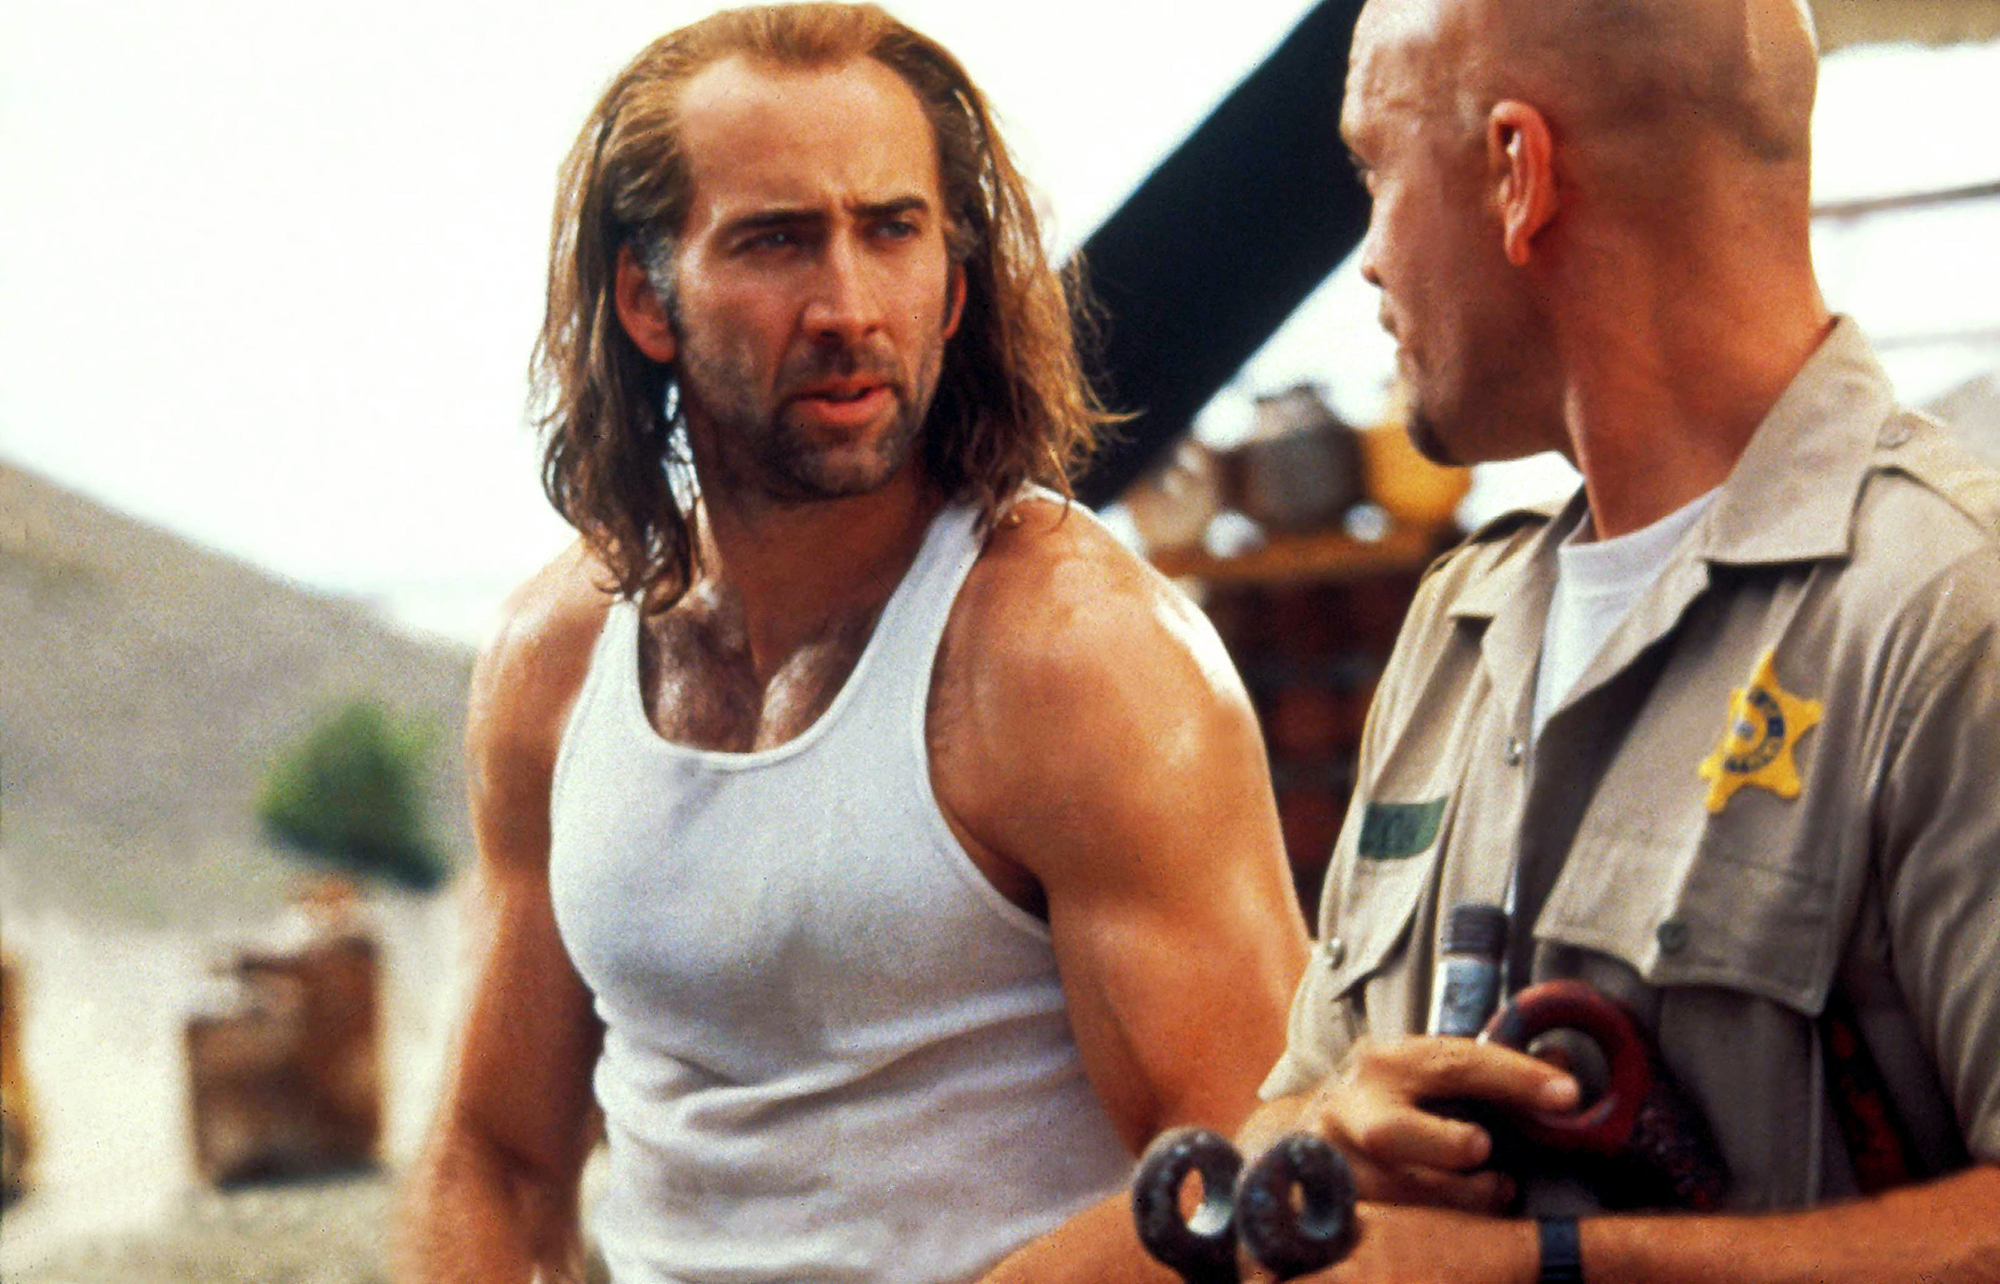 Nicolas Cage #39 s Most Iconic Roles See the List of Films Here